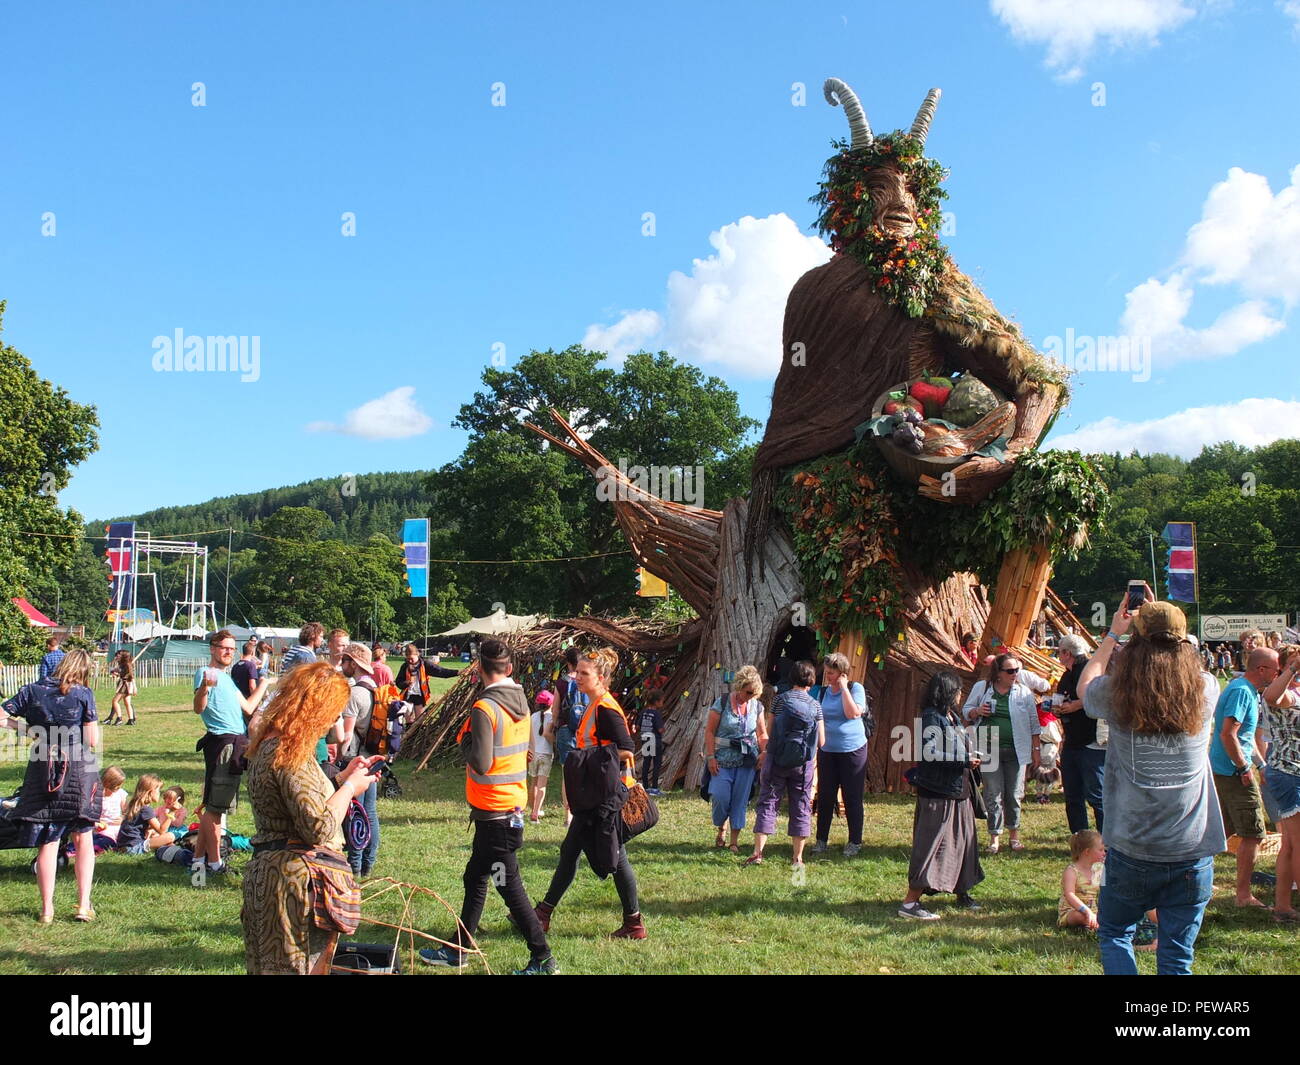 Impressive Green Man sculpture built by Pyrite Creative for the Green Man festival held in Wales. It is ceremonially burnt at the end of the festival. Stock Photo